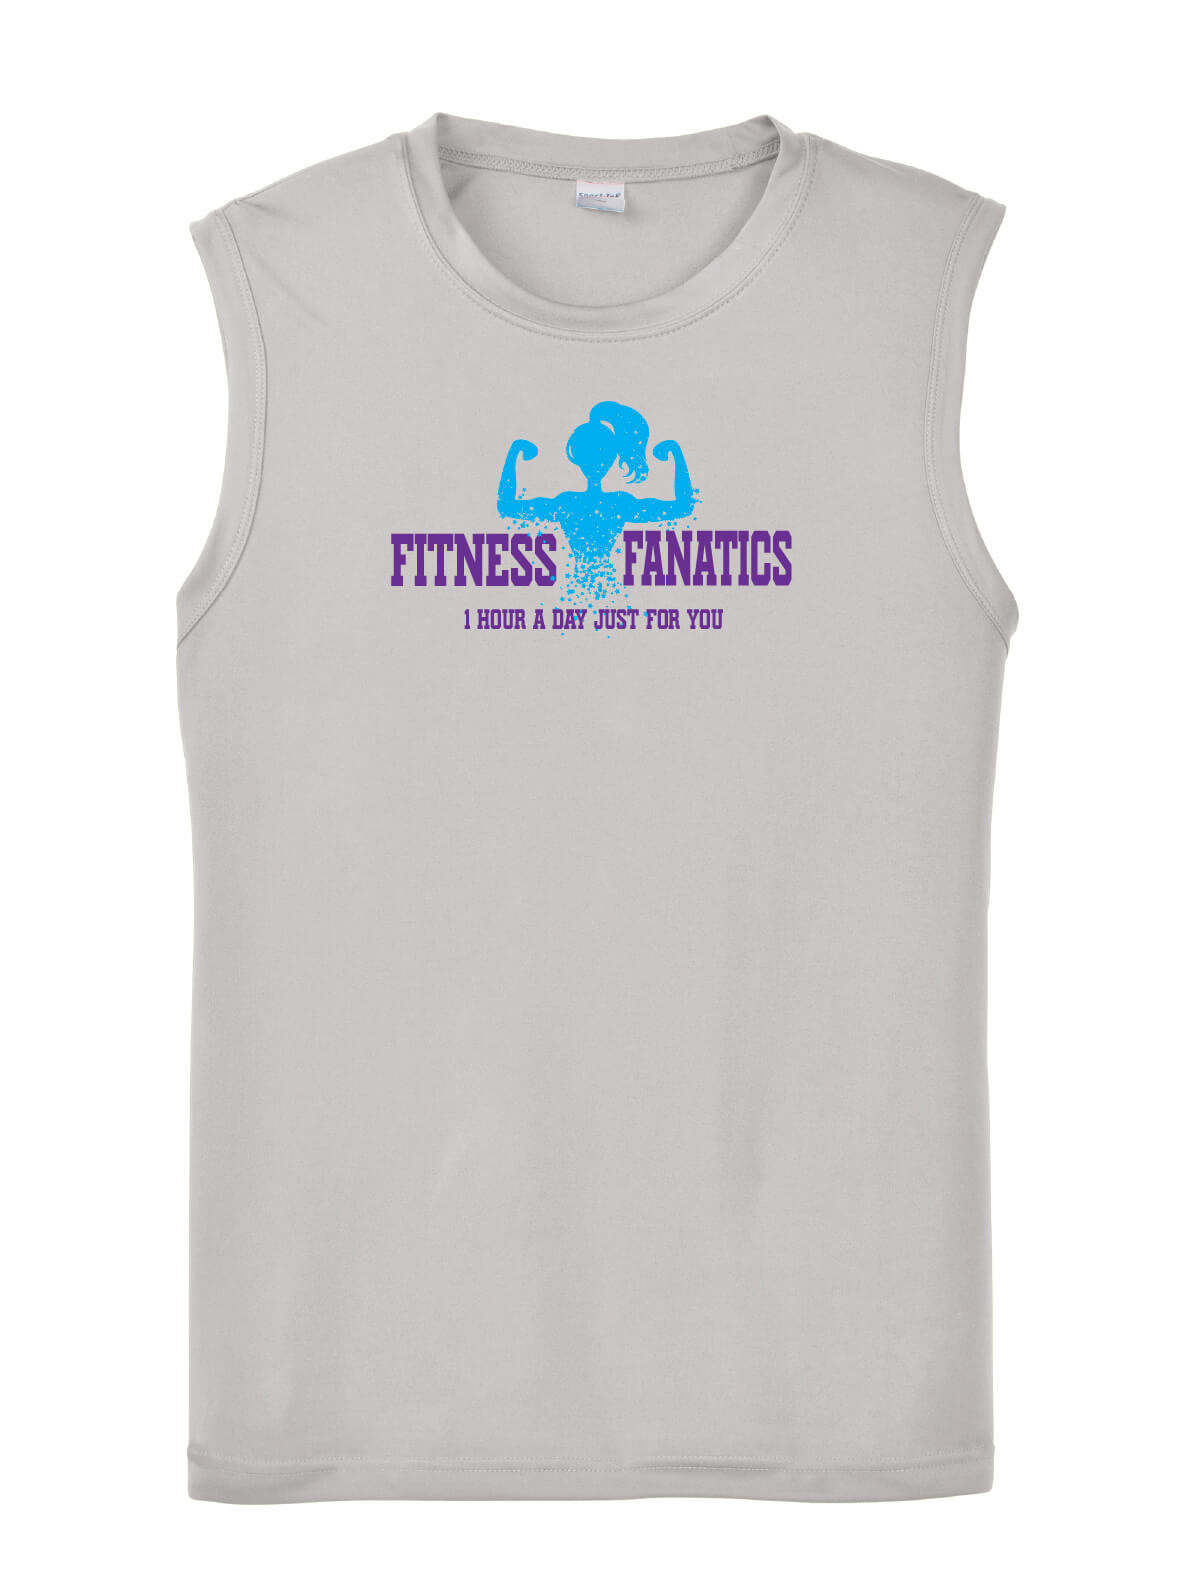 Mens Competitor Tank gray with blue